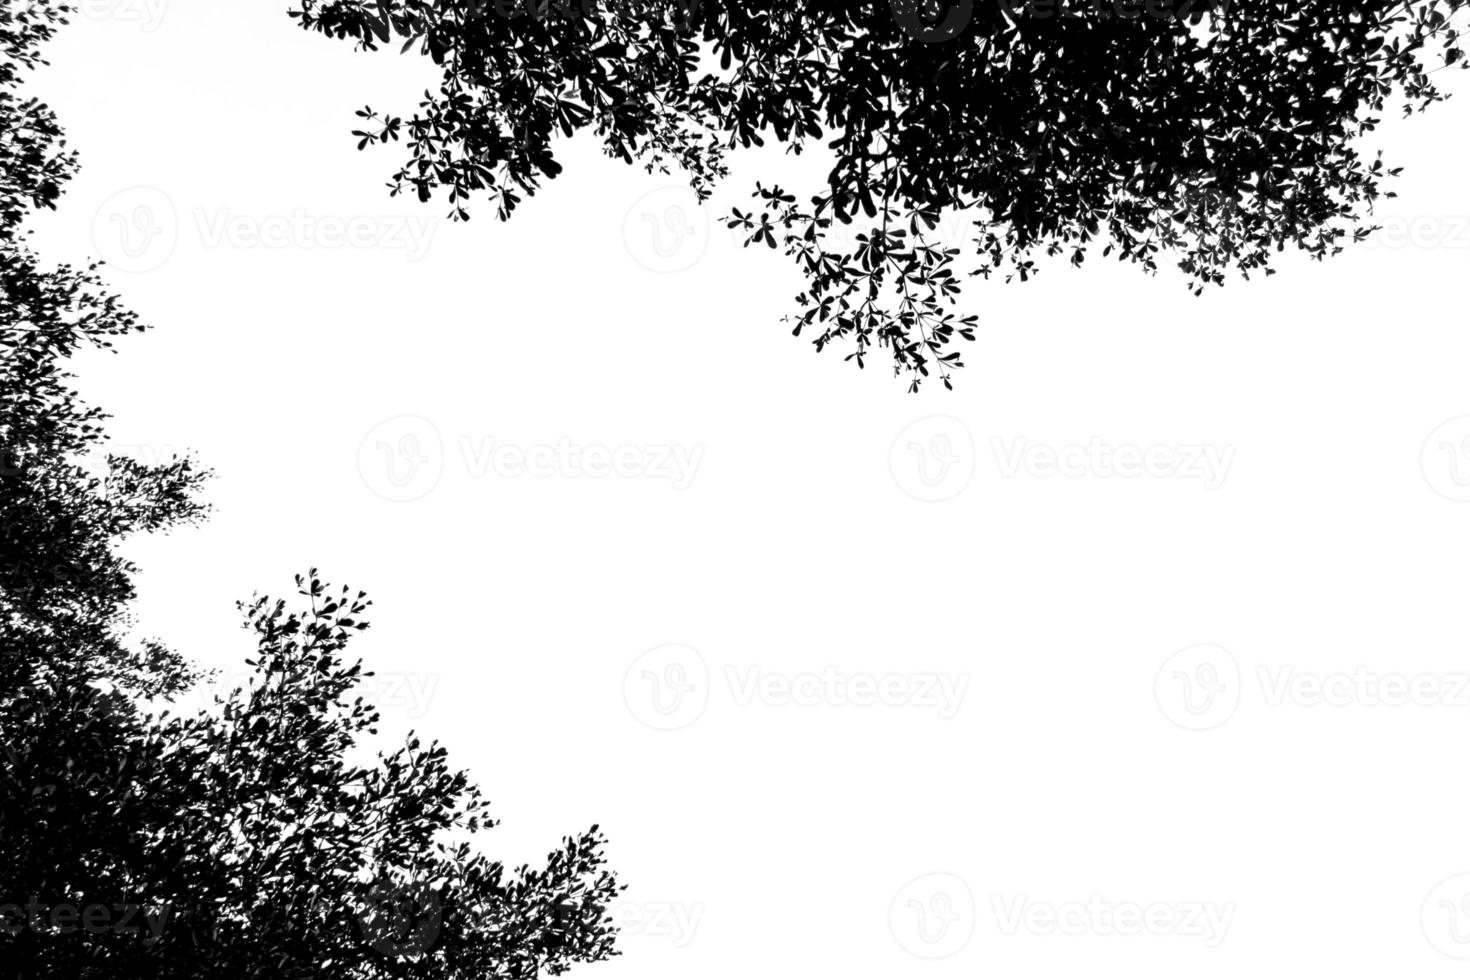 Black Branches of trees on white background photo